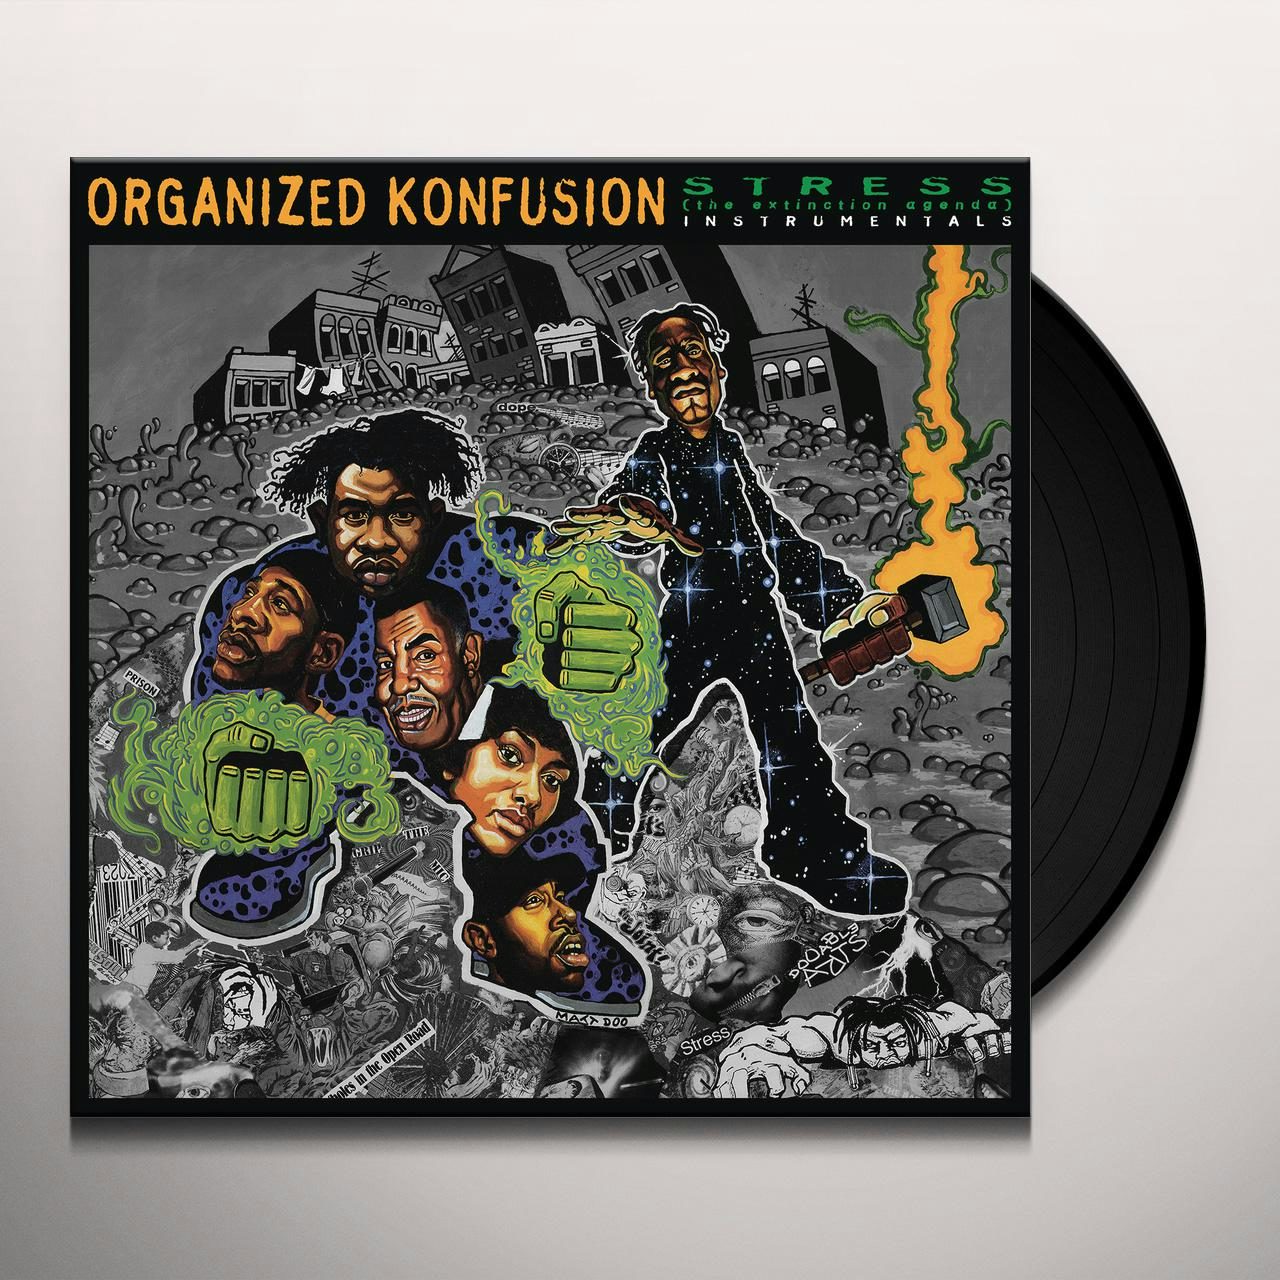 Organized Konfusion Store: Official Merch & Vinyl